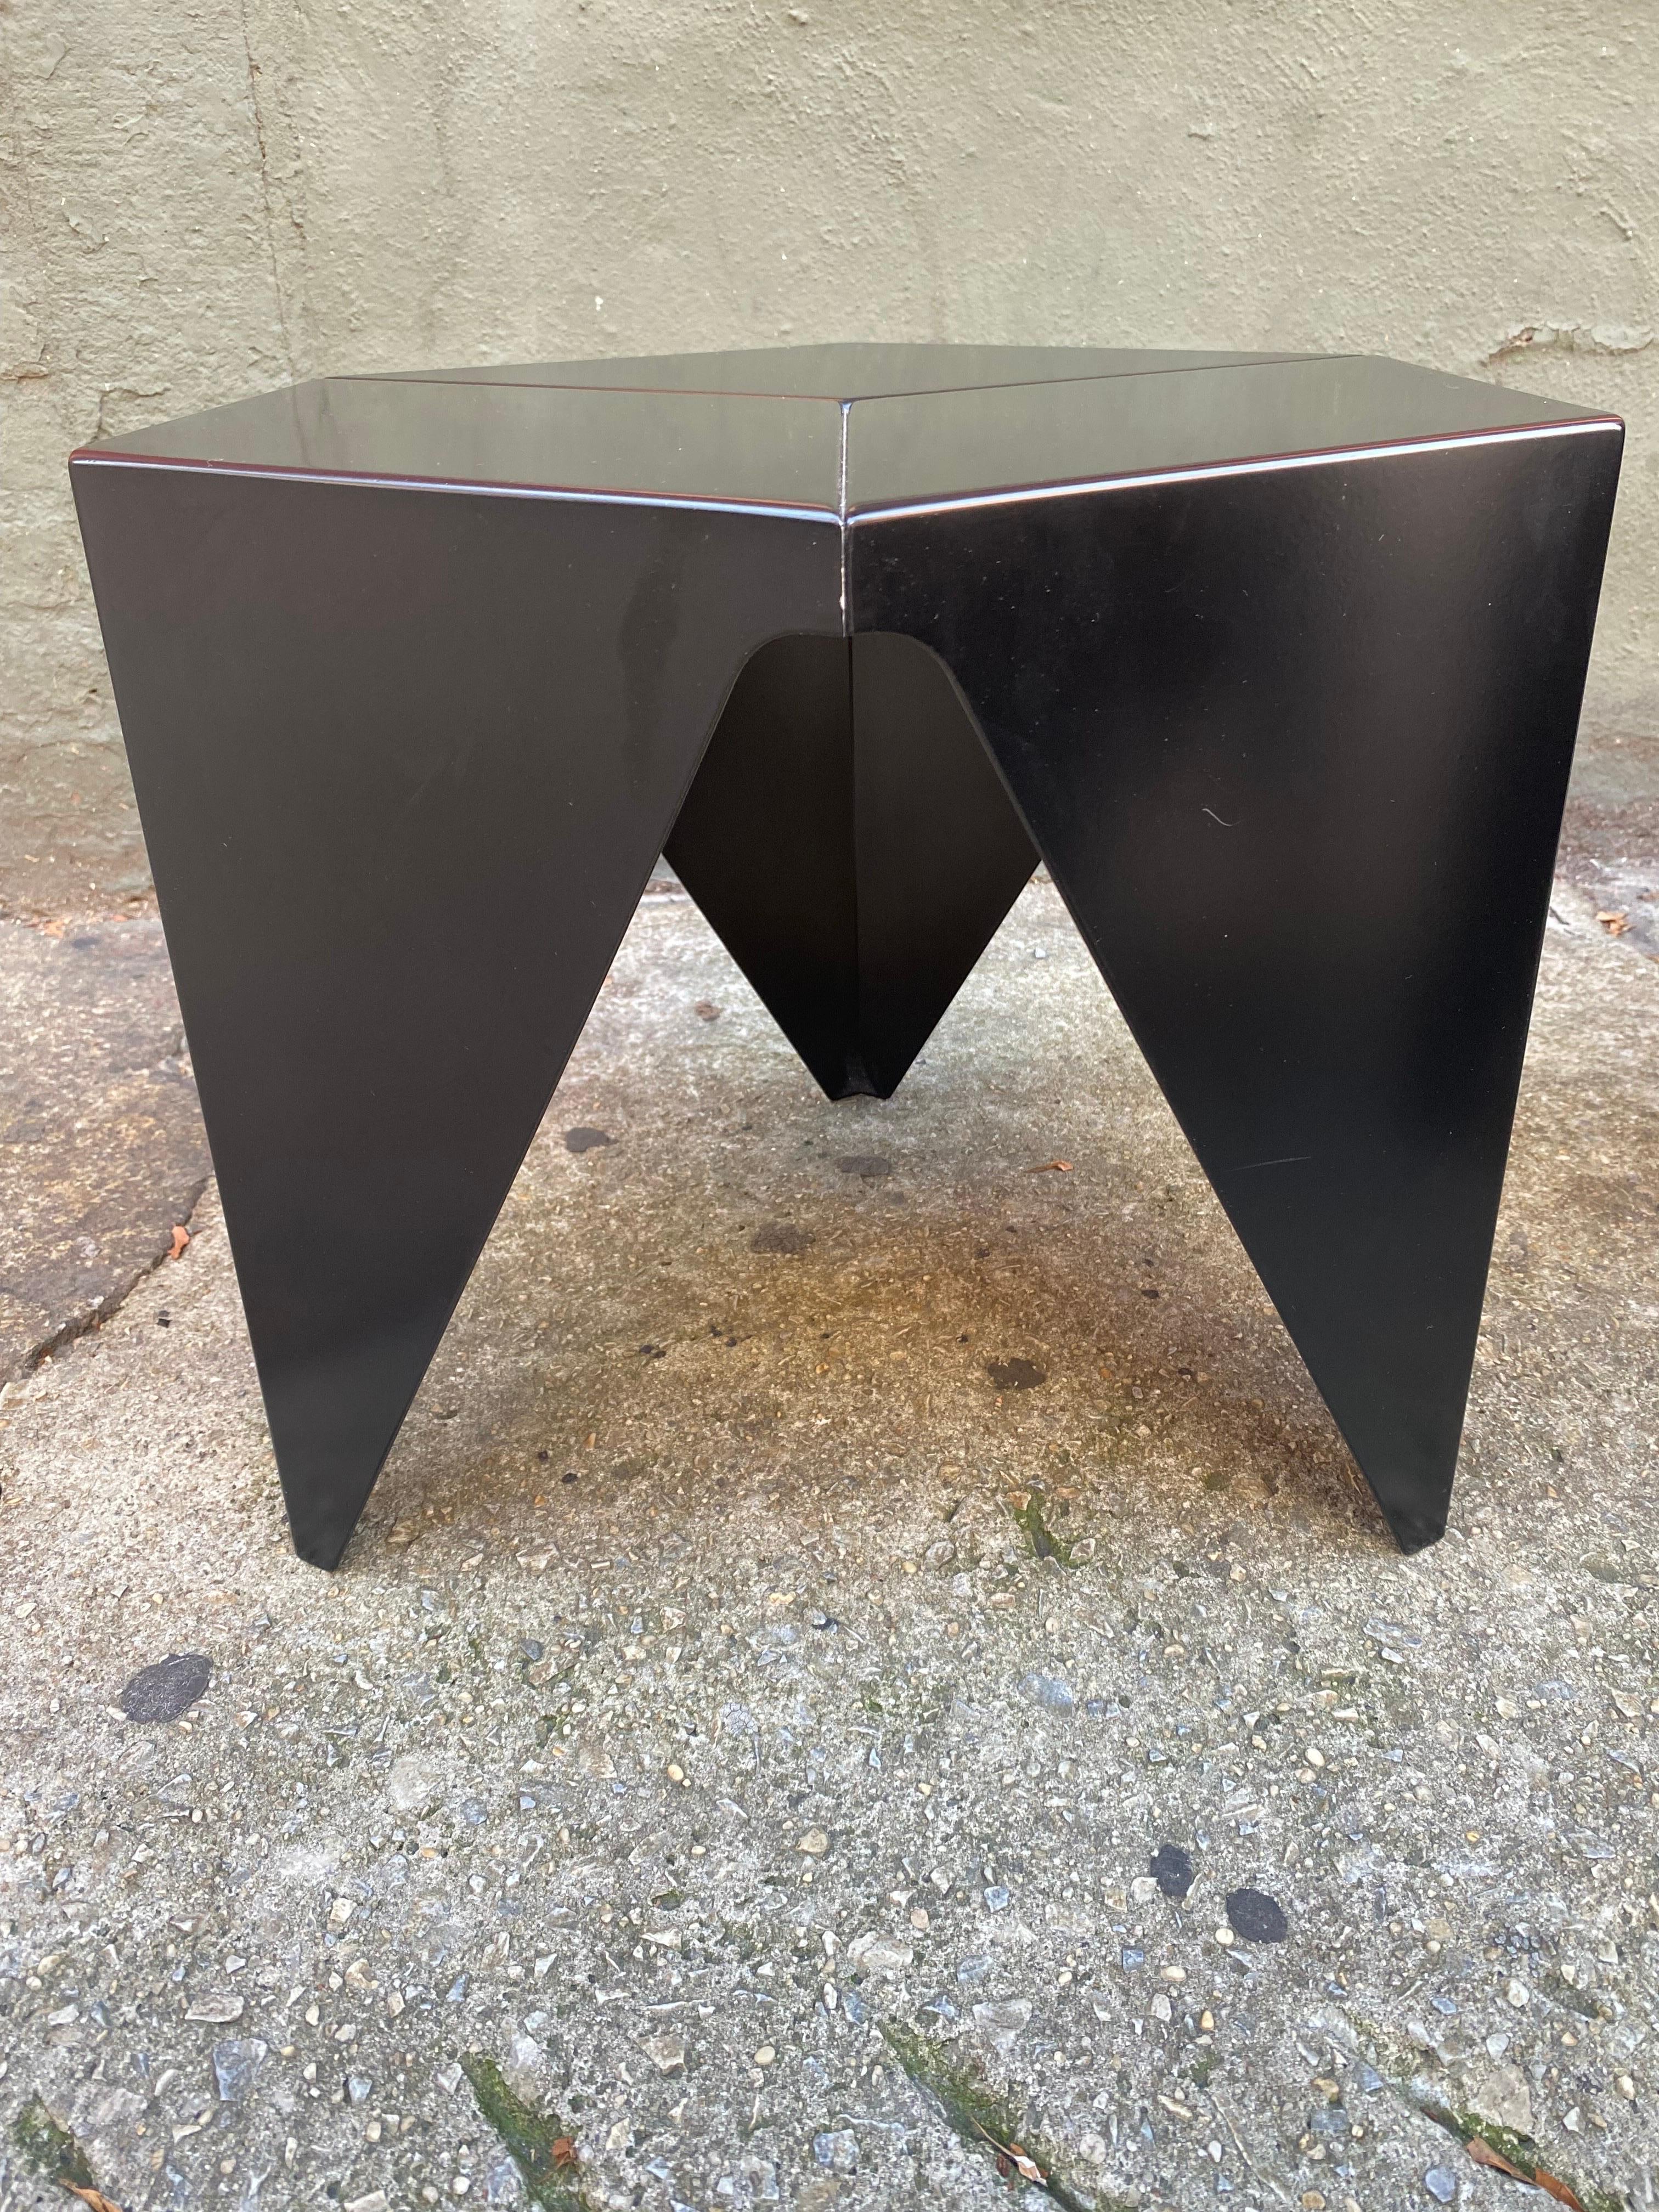 Noguchi Prismatic Tables for Vitra, 2 Available, priced separately! For Sale 1